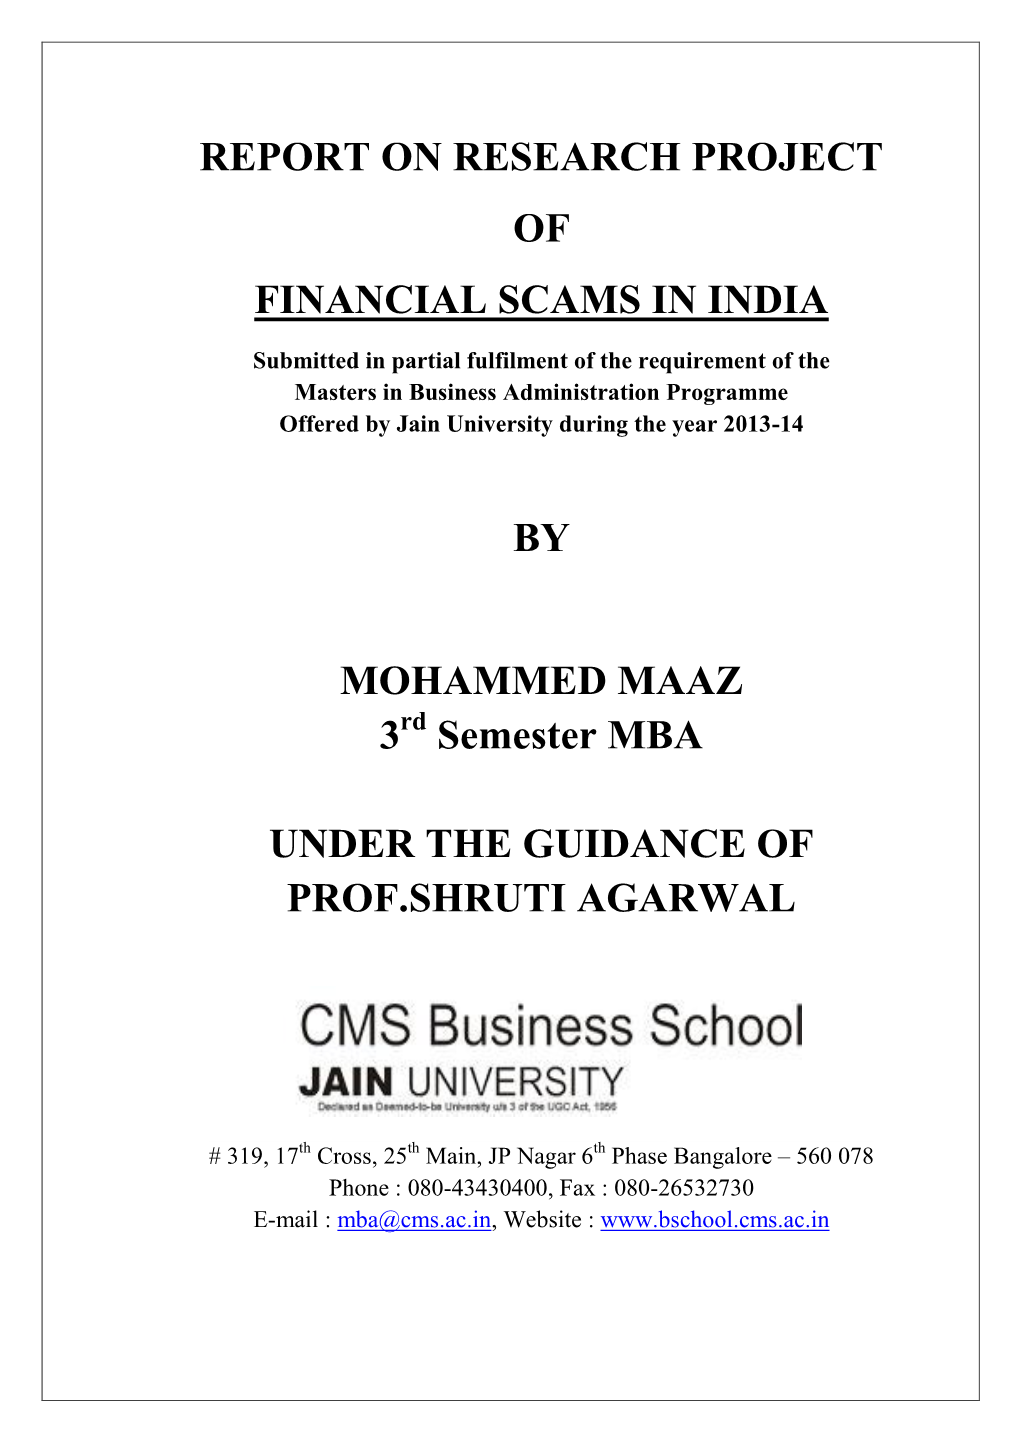 Report on Research Project of Financial Scams in India